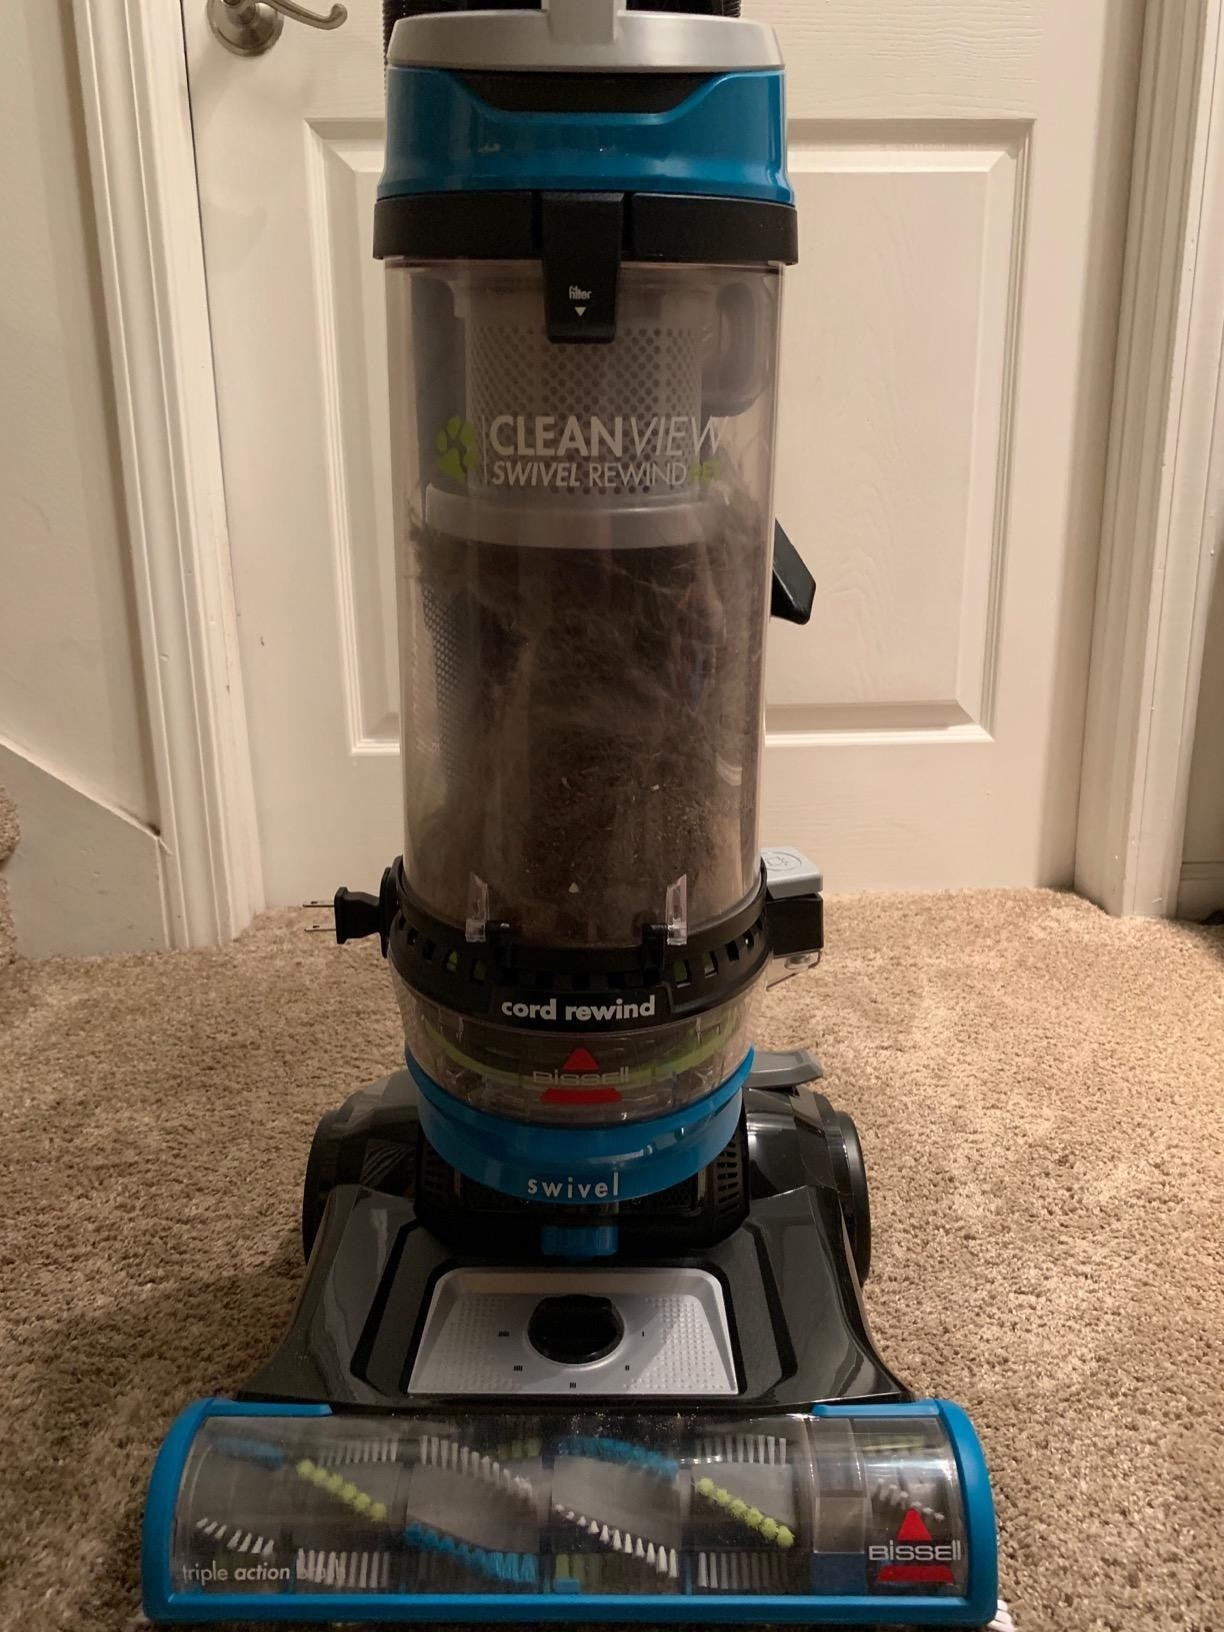 A review image of the vacuum full of picked-up pet hair and dust